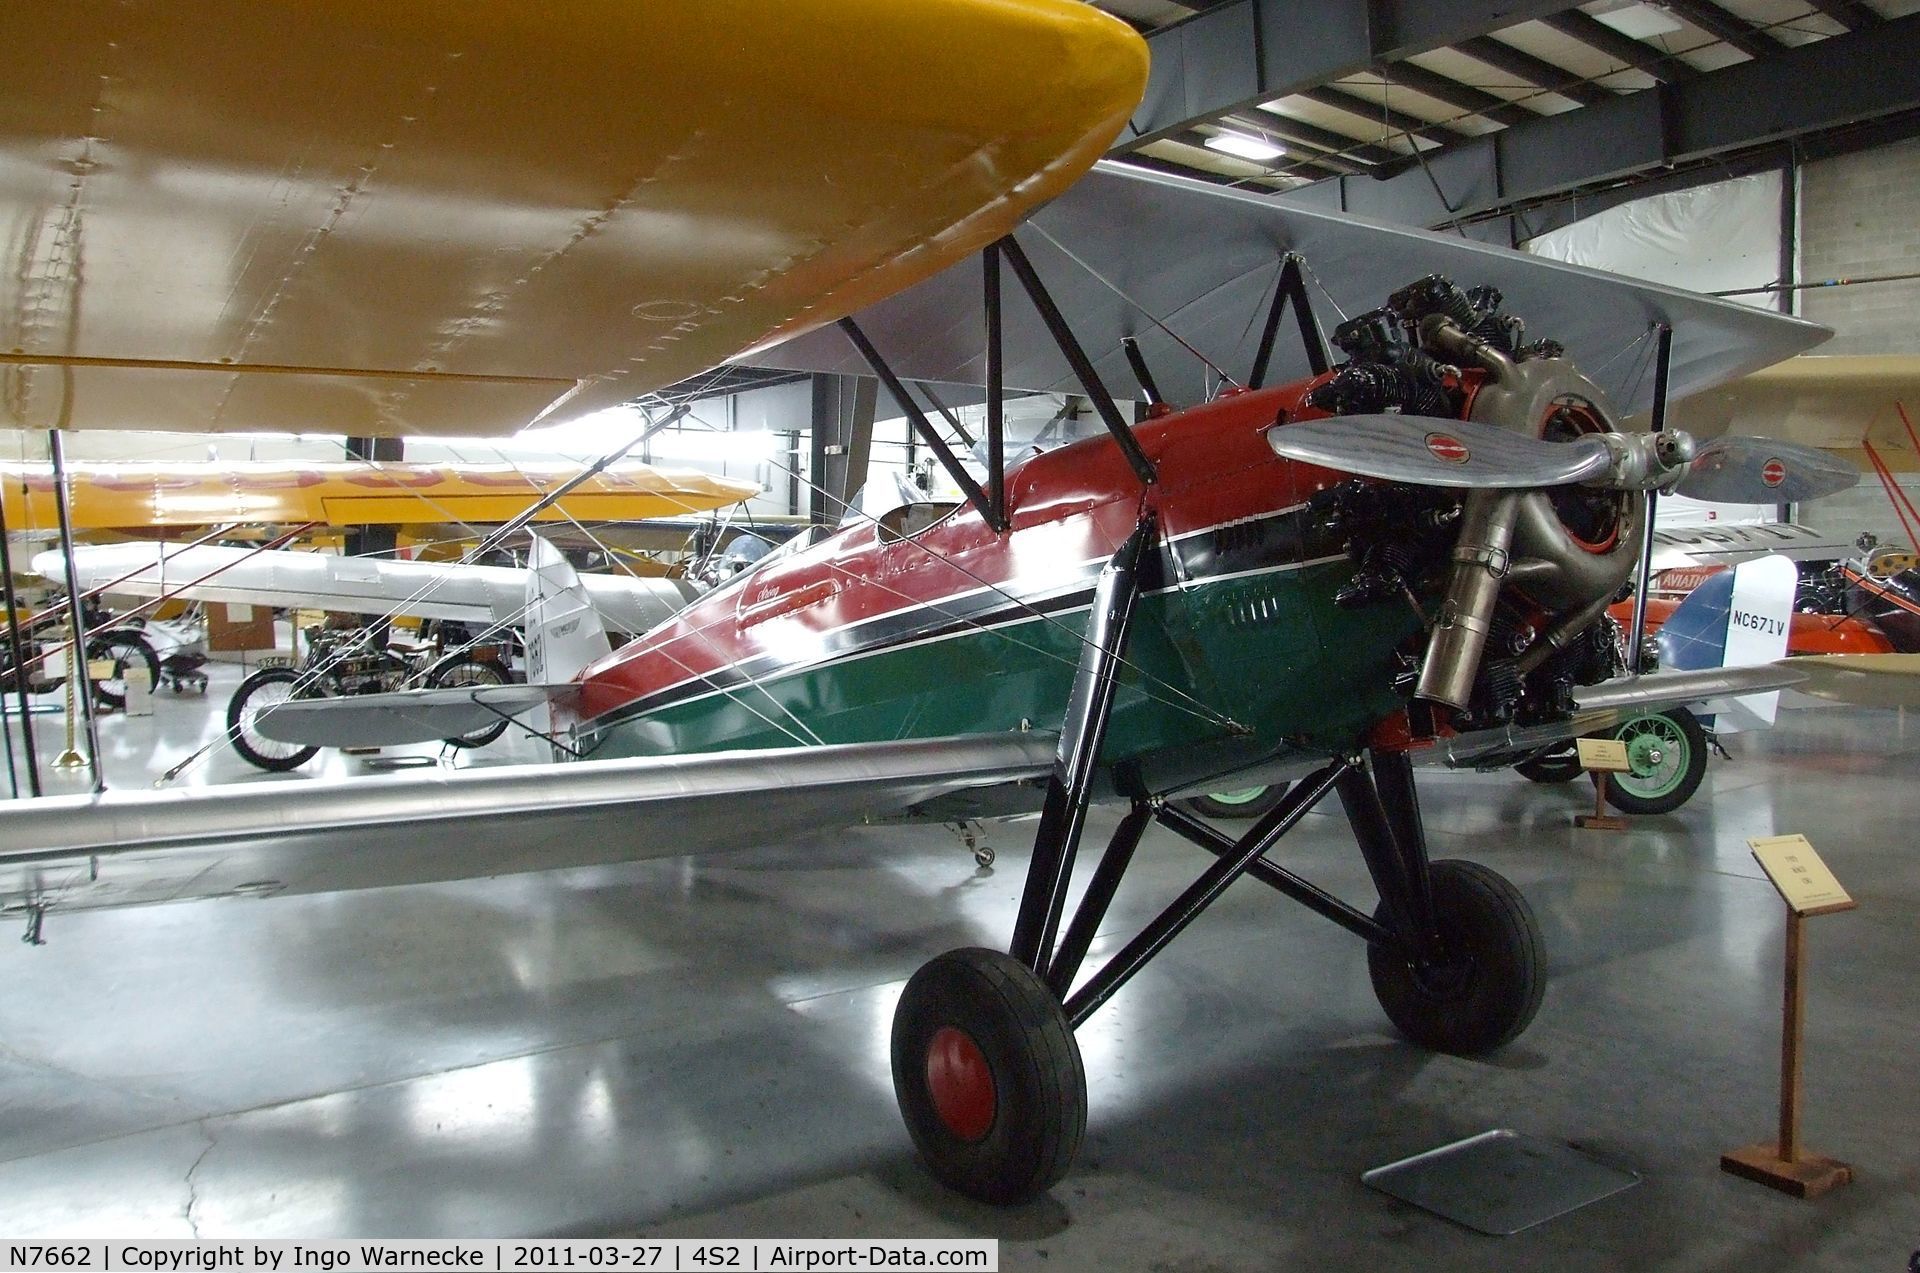 N7662, Waco GXE C/N 1657, Waco CSO at the Western Antique Aeroplane and Automobile Museum, Hood River OR